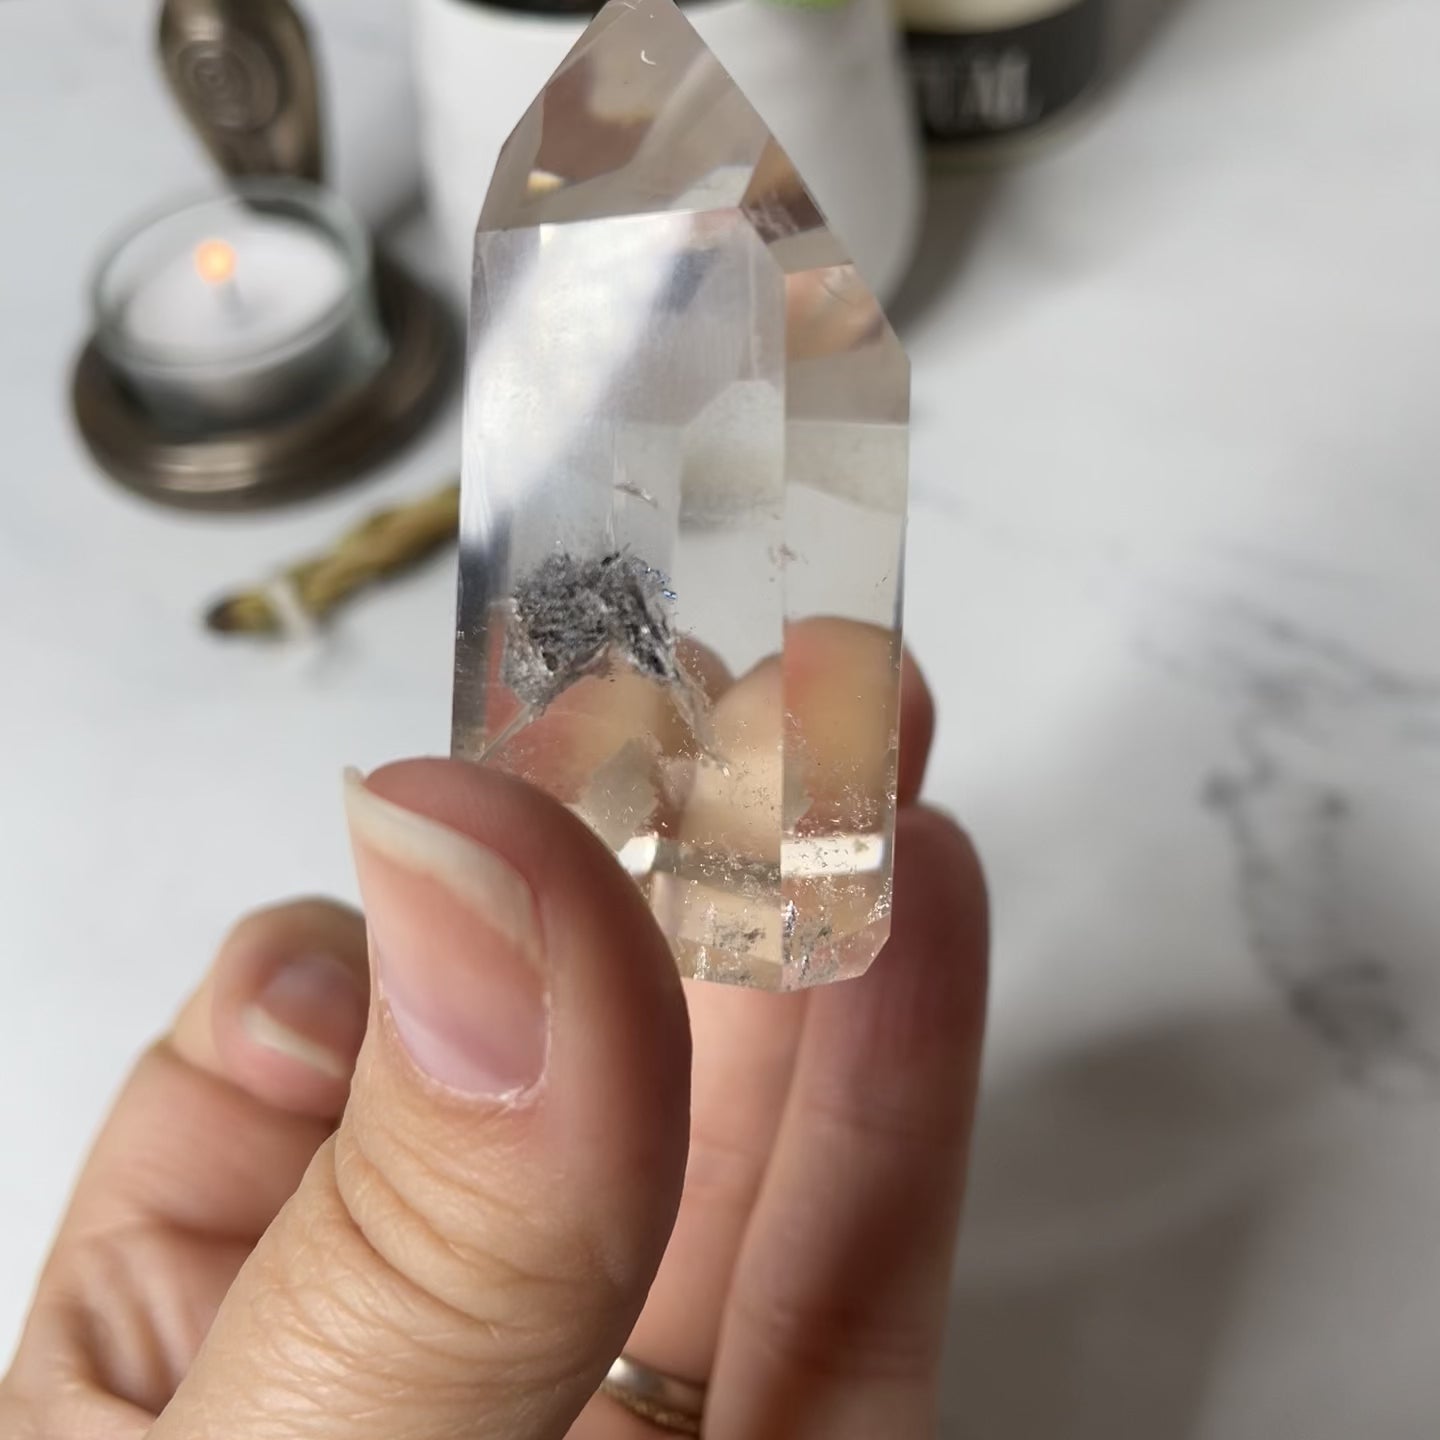 Freya's Haven | Metaphysical & Crystal shop | A close up video of a Lodalite  crystal held in a woman's hand with candles in the background.